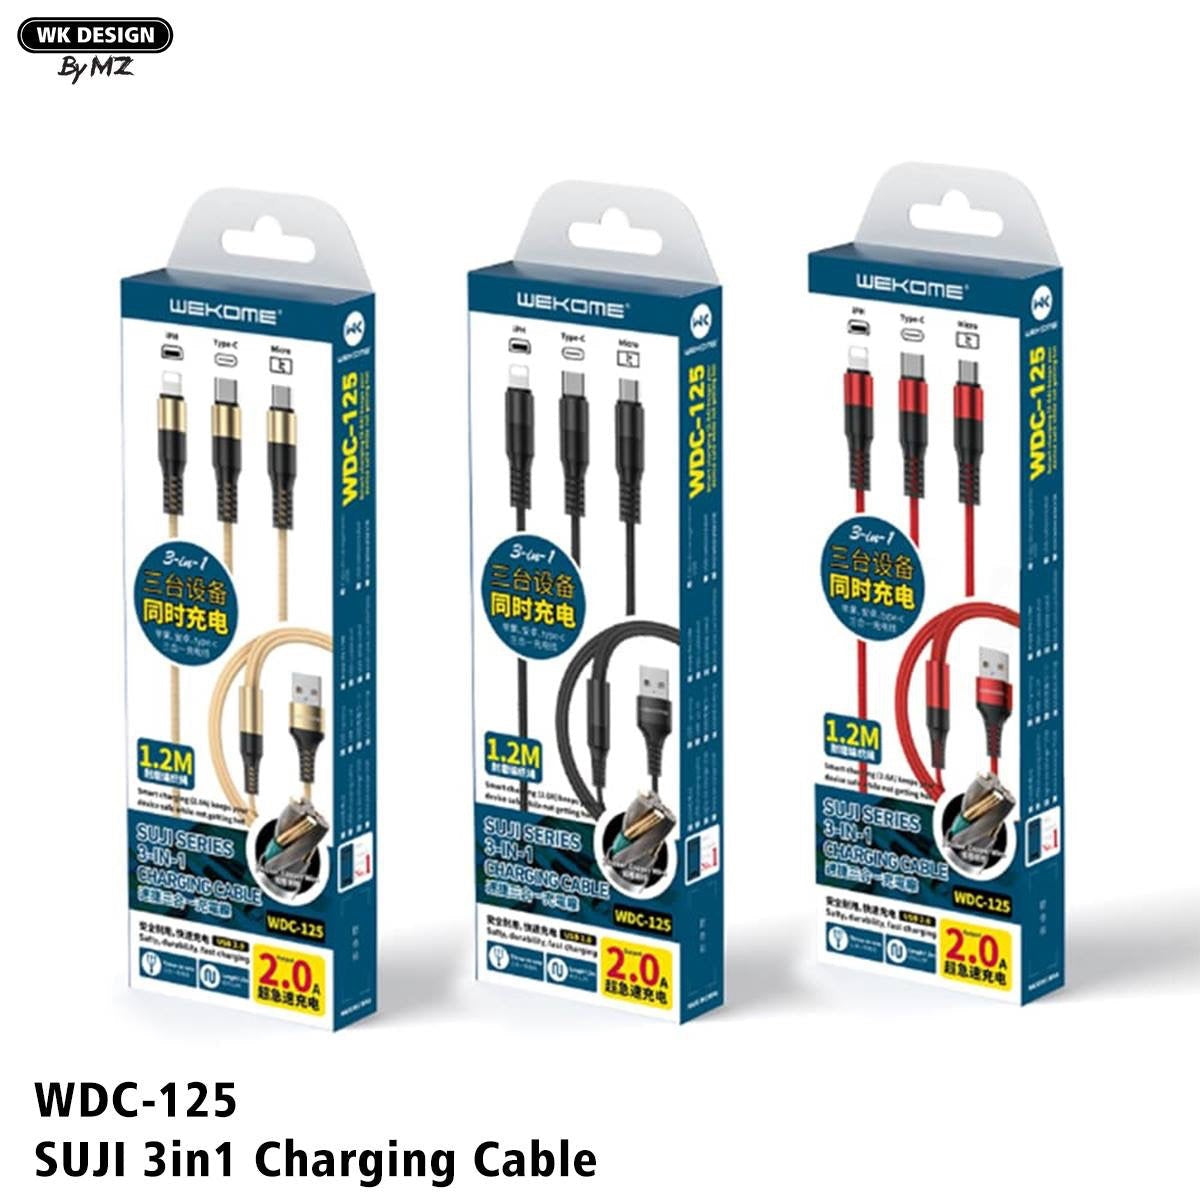 WEKOME 3 in 1 Cable WDC-125TH SUJI SERIES 2.0A 3 IN 1 CHARGING CABLE - Black